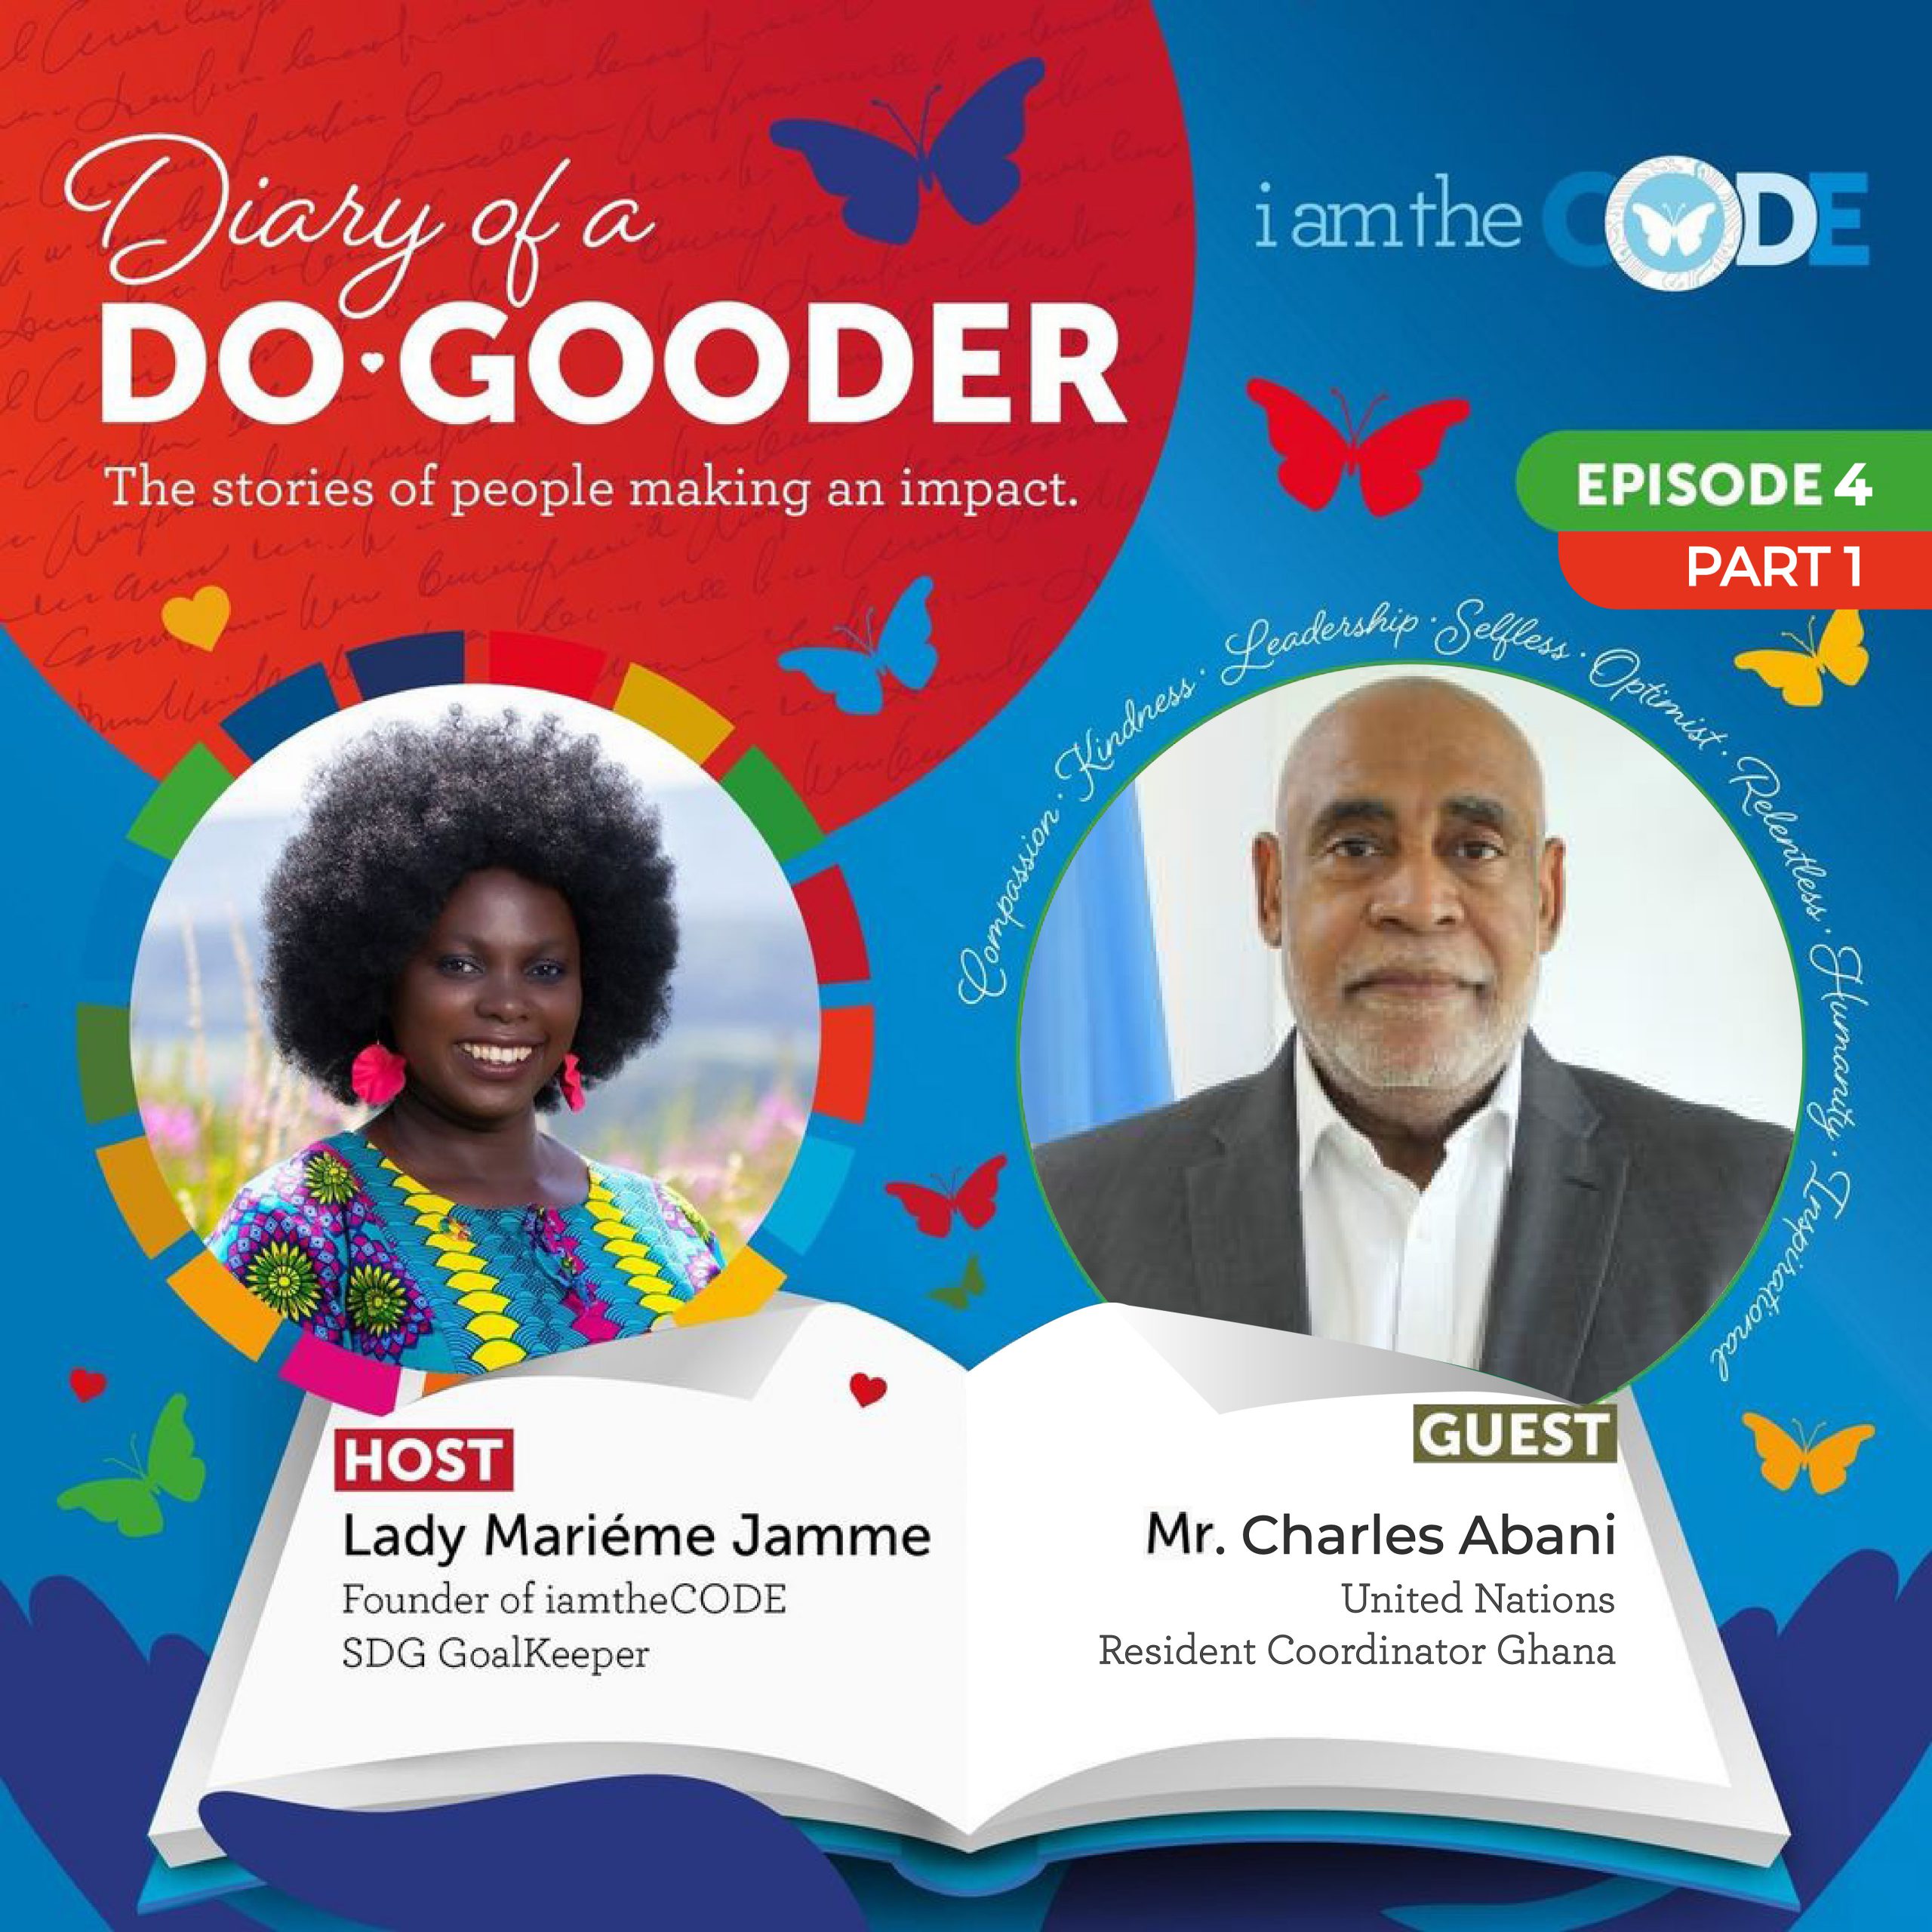 S7E4 Diary Of A Do-Gooder – Power Of Self-Belief With Charles Abani (Part 1)